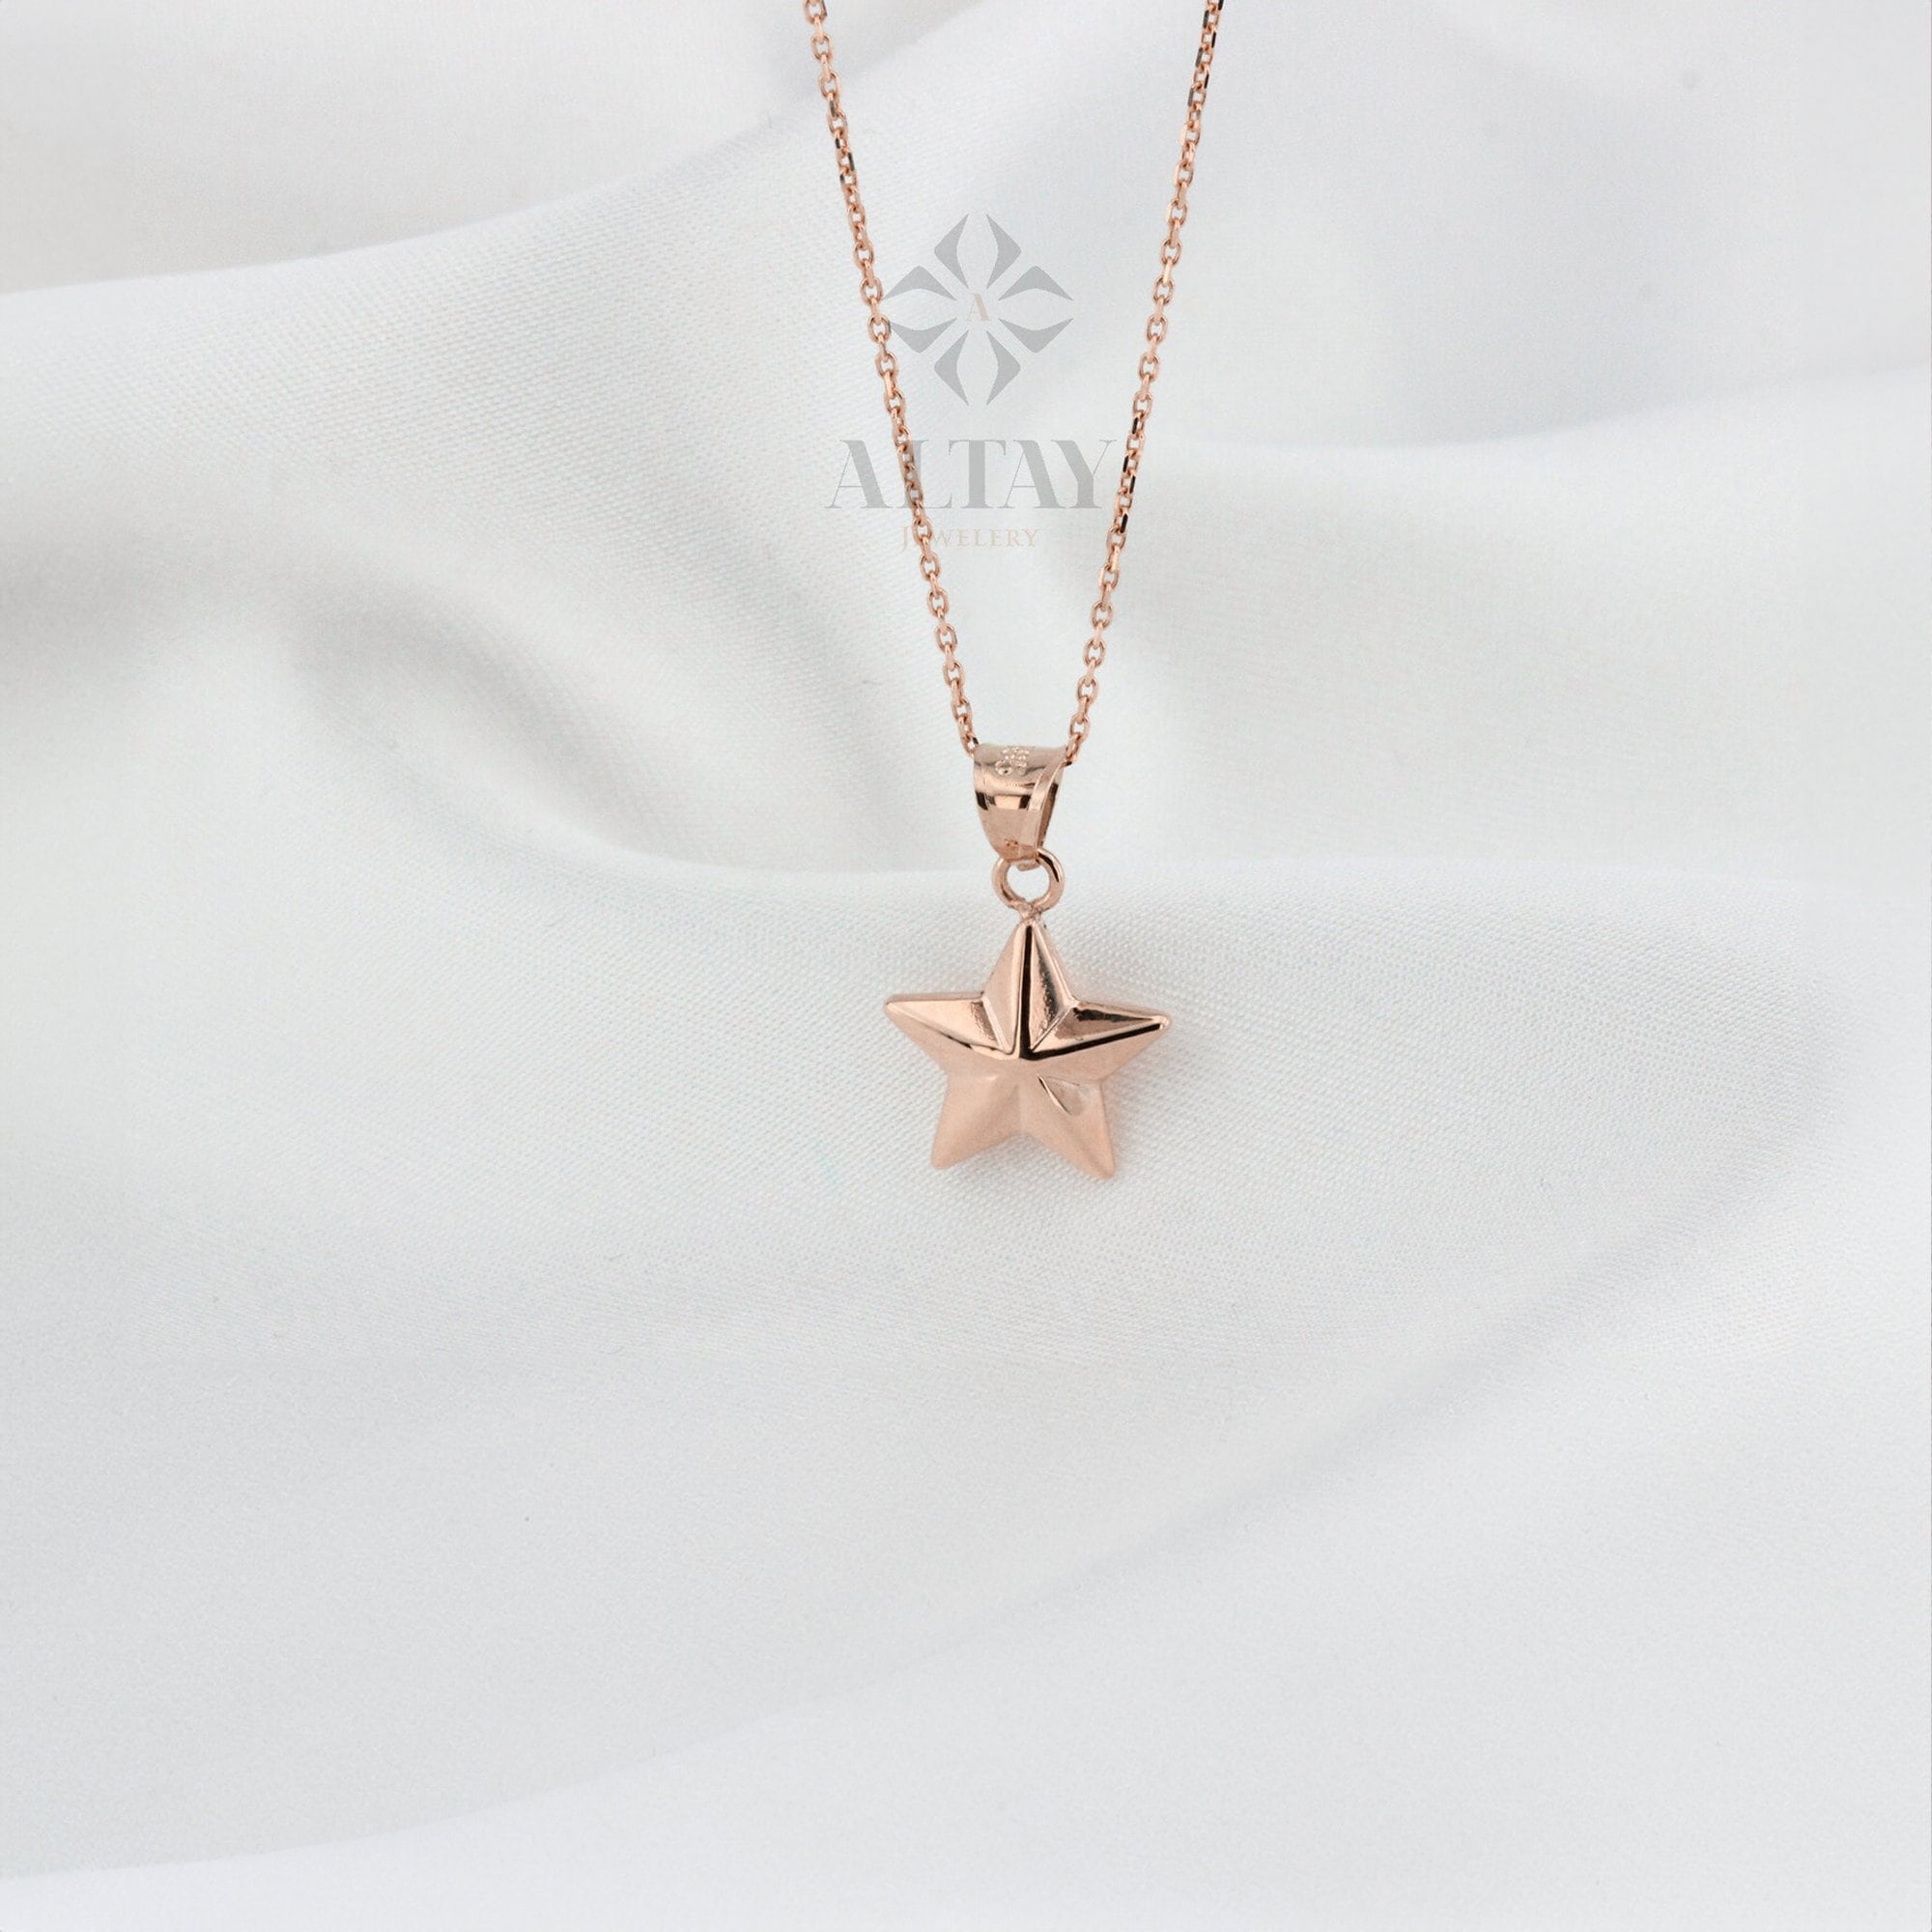 14K Gold Star Necklace, Small Star Pendant, 3D Star Charm Necklace, Stars Dainty Charm, Simple Tiny Necklace, Boho Jewelry, Gift for Her